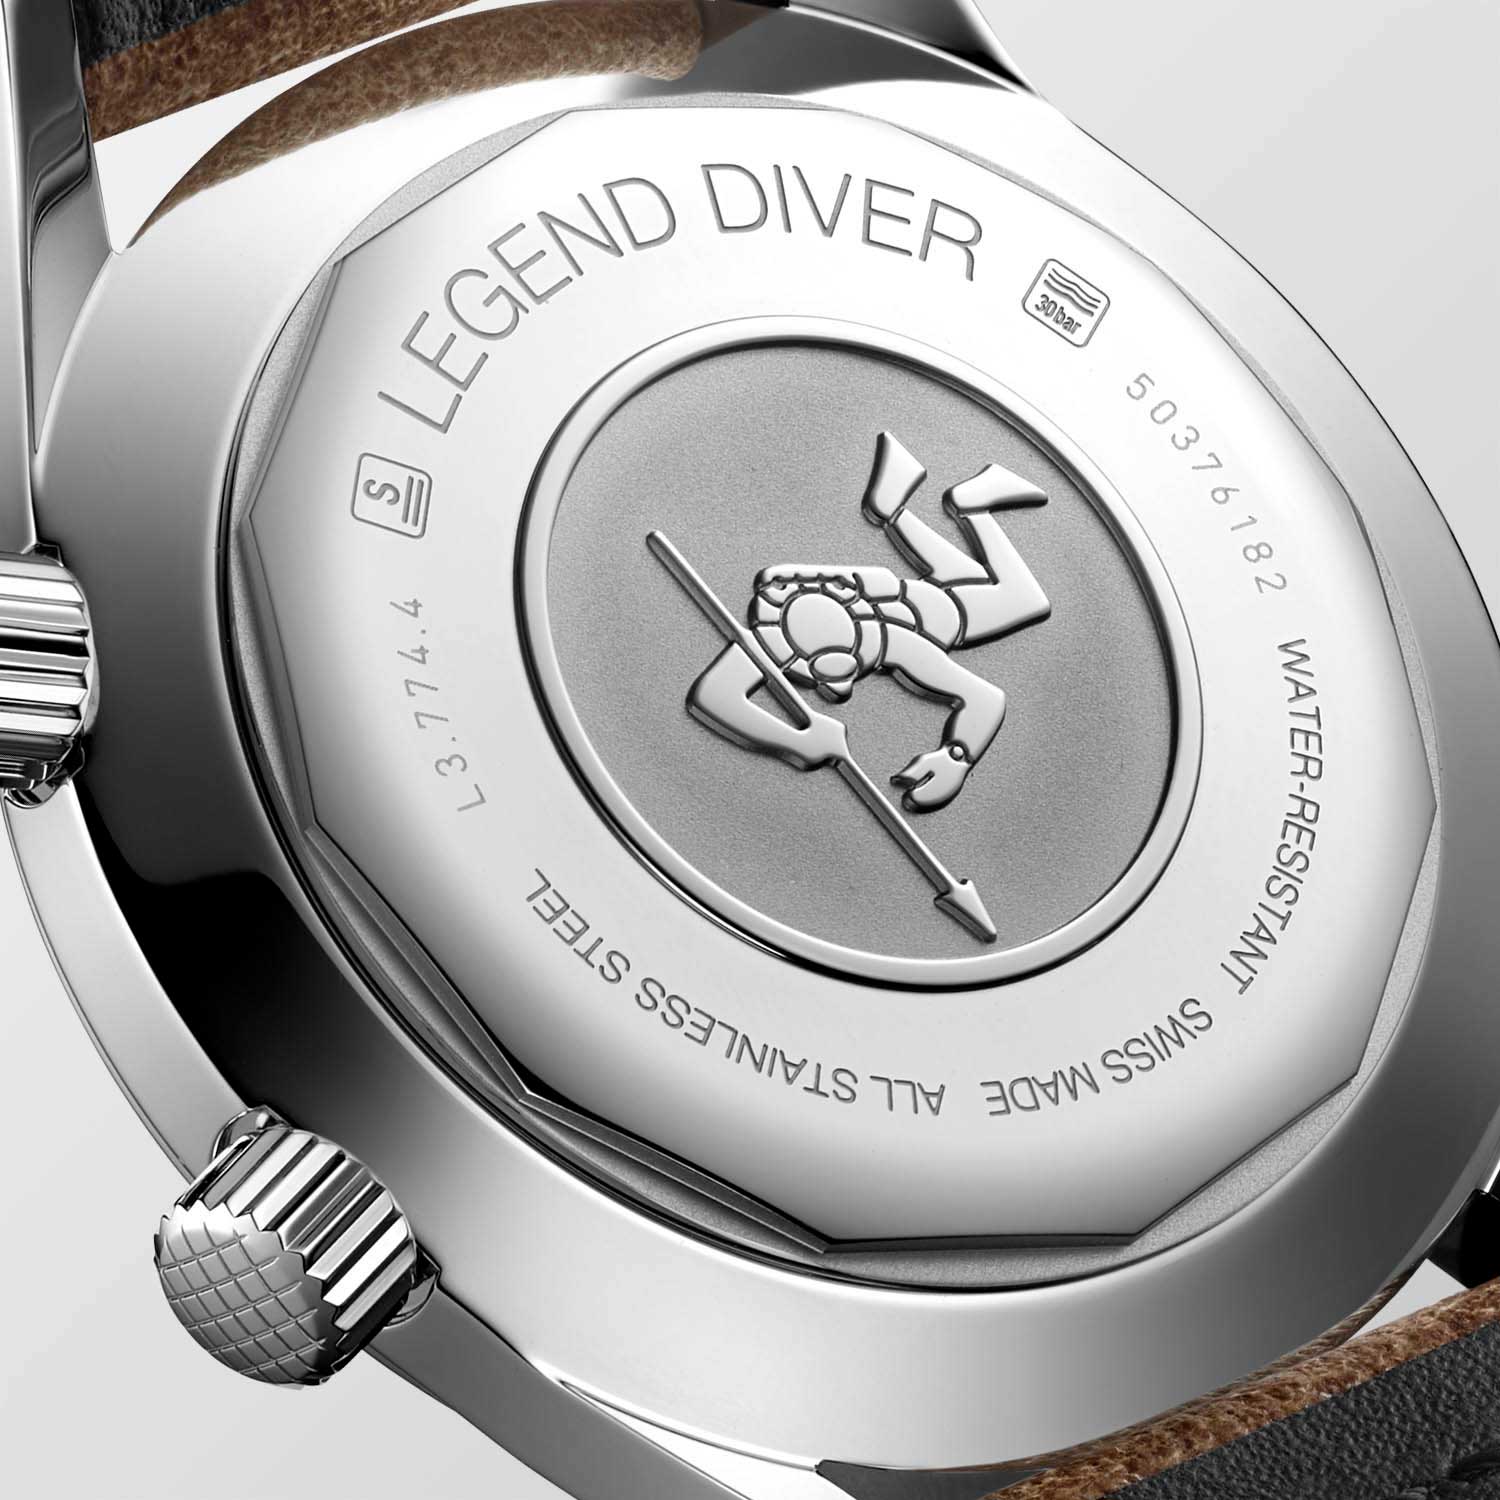 Like in the original model, the new watches are engraved with a diver’s figure on the caseback